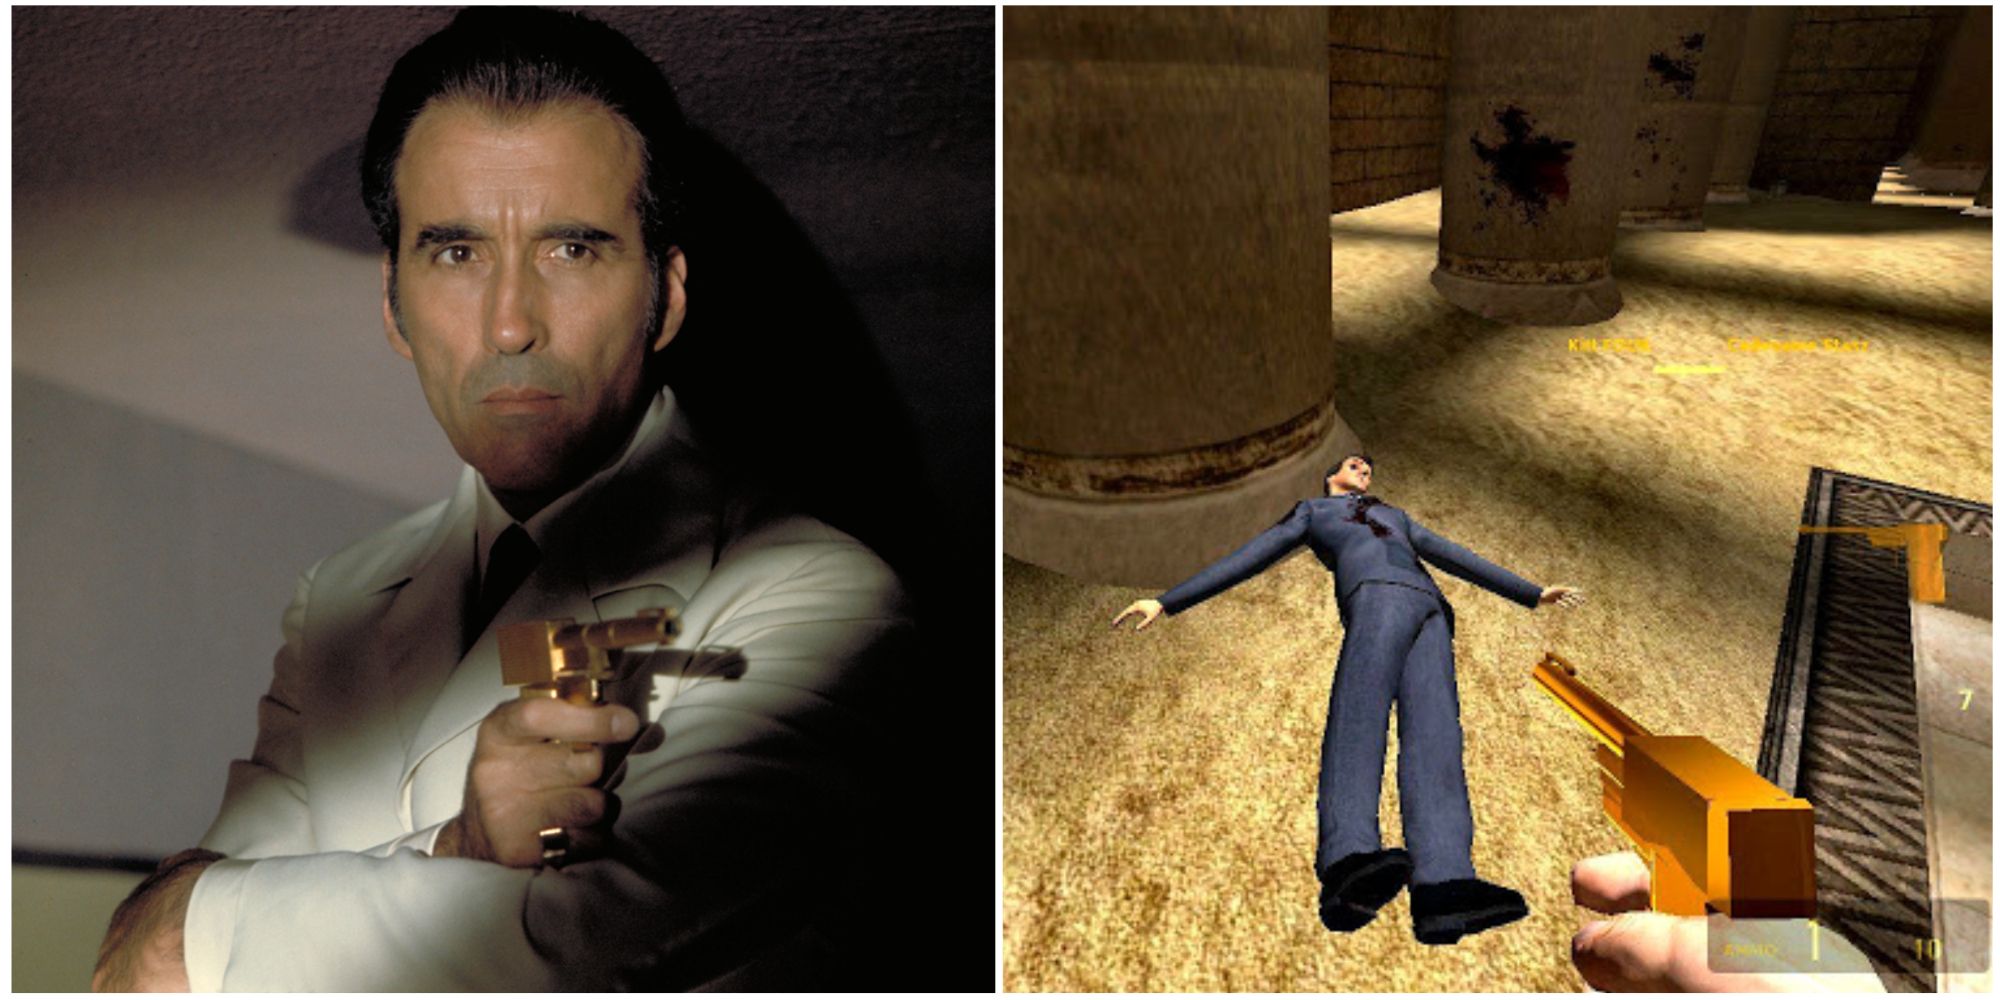 The Man with the Golden Gun and GoldenEye 007